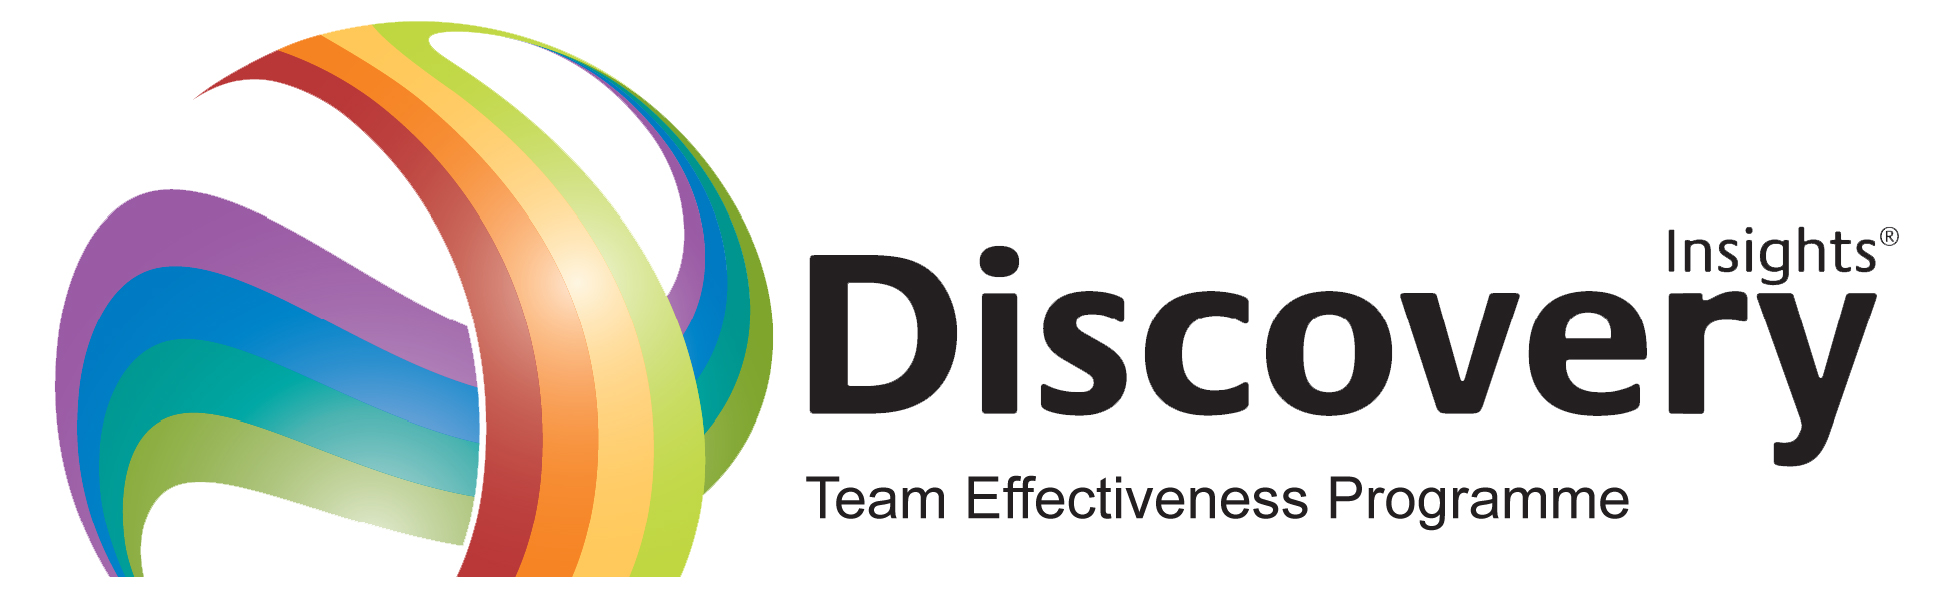 Discovery Insights Team Effectiveness Programme